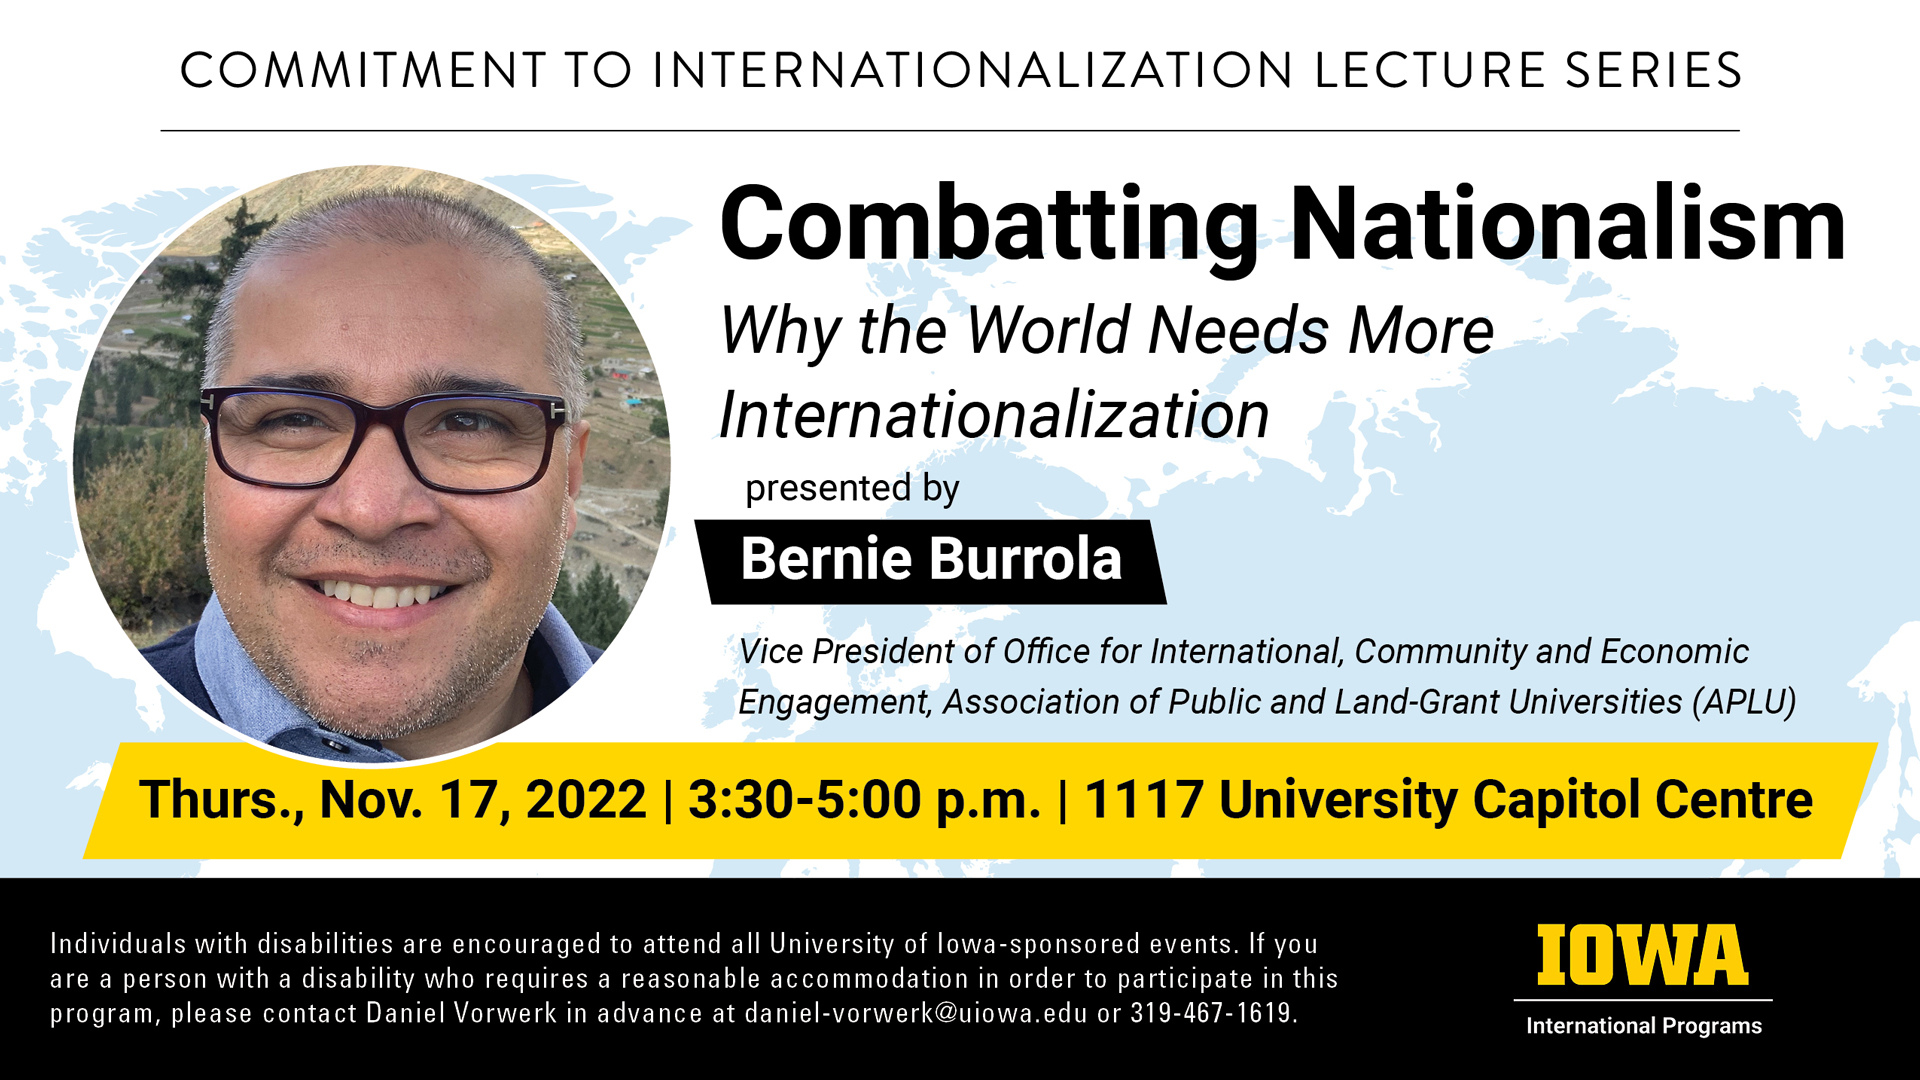 Commitment to Internationalization Lecture Series: Combatting Nationalism - Why the World Needs More Internationalization, presented by Bernie Burrola (Vice President of Office for International, Community and Economic Engagement, Association of Public and Land-Grant Universities (APLU). Thursday, November 17 | 3:30 PM to 5:00 PM. 1117 University Capitol Centre.